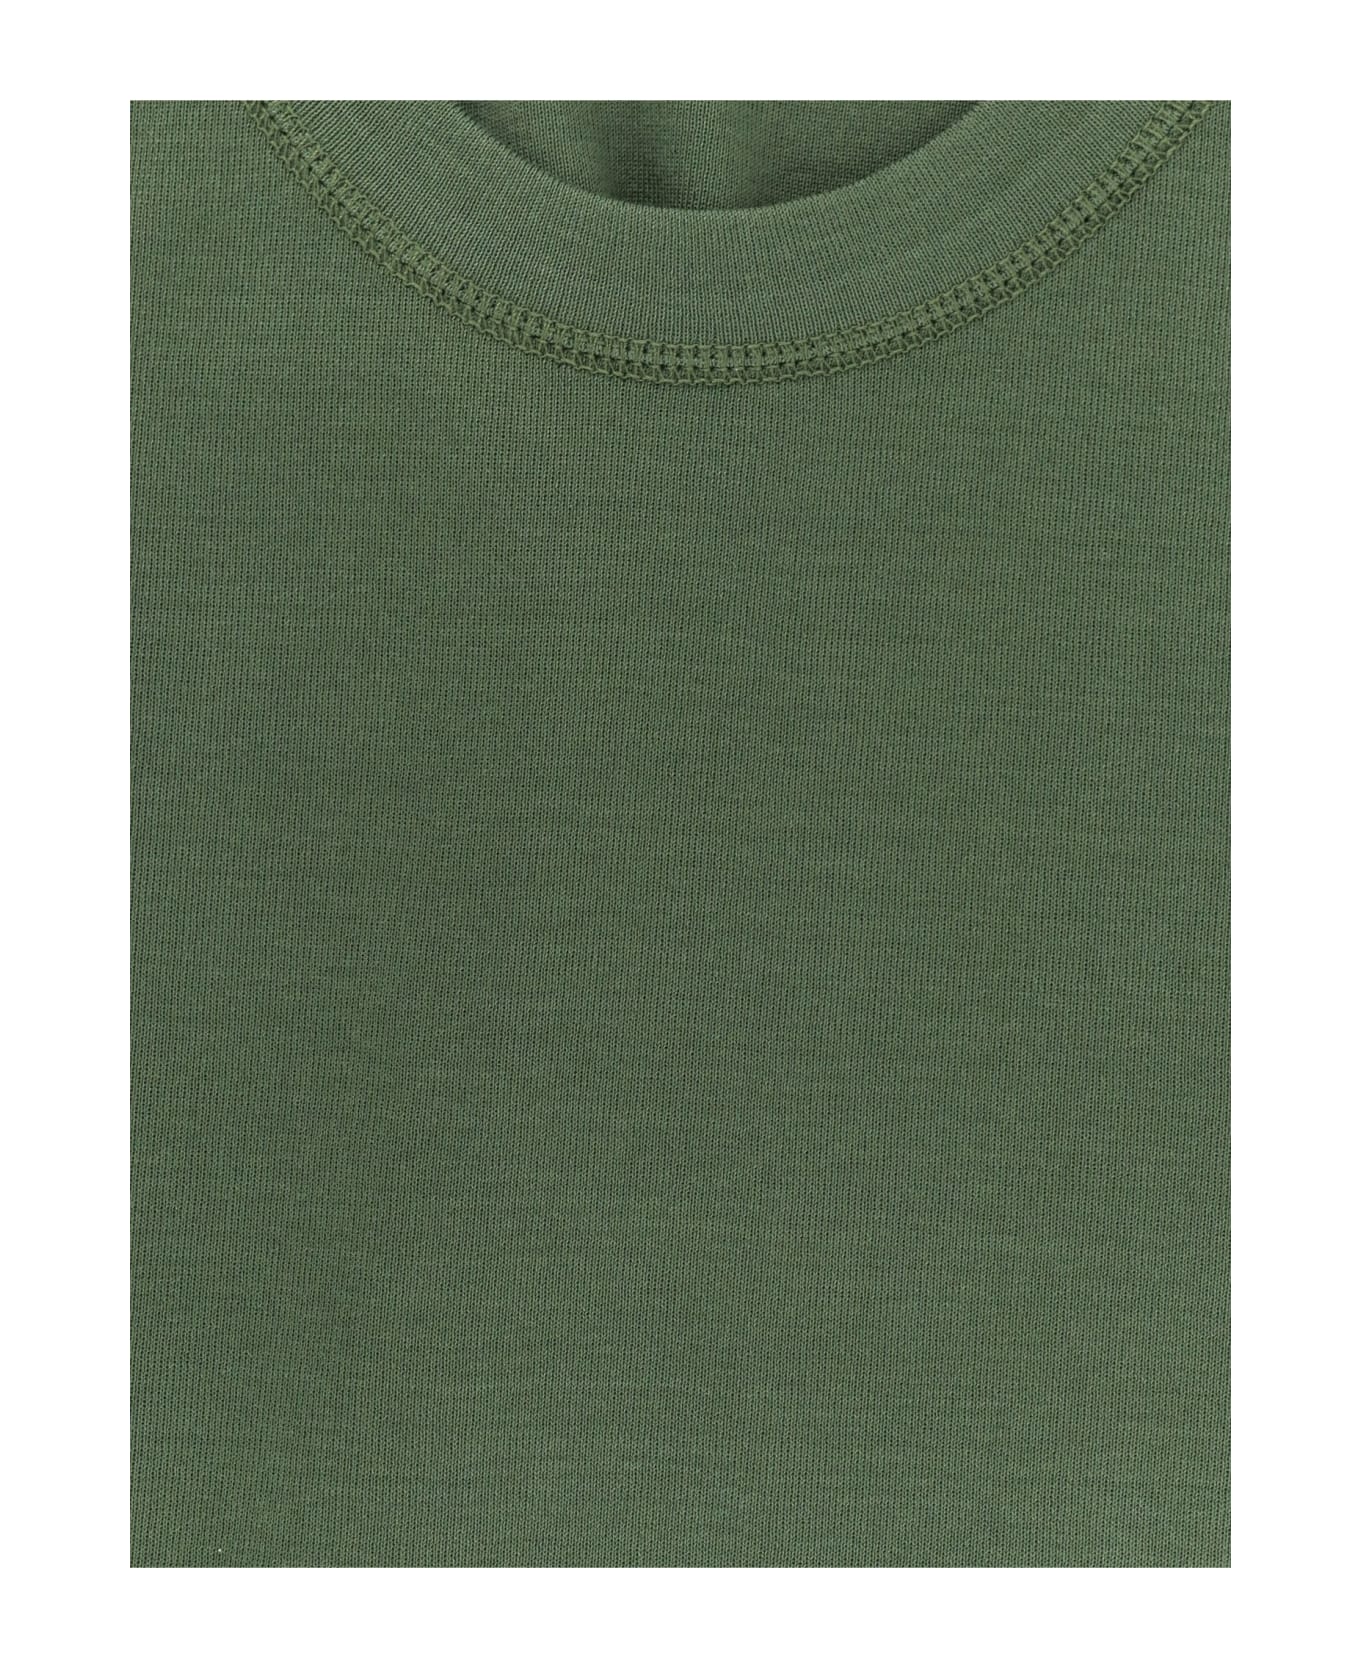 Lemaire Tank Top - Green タンクトップ